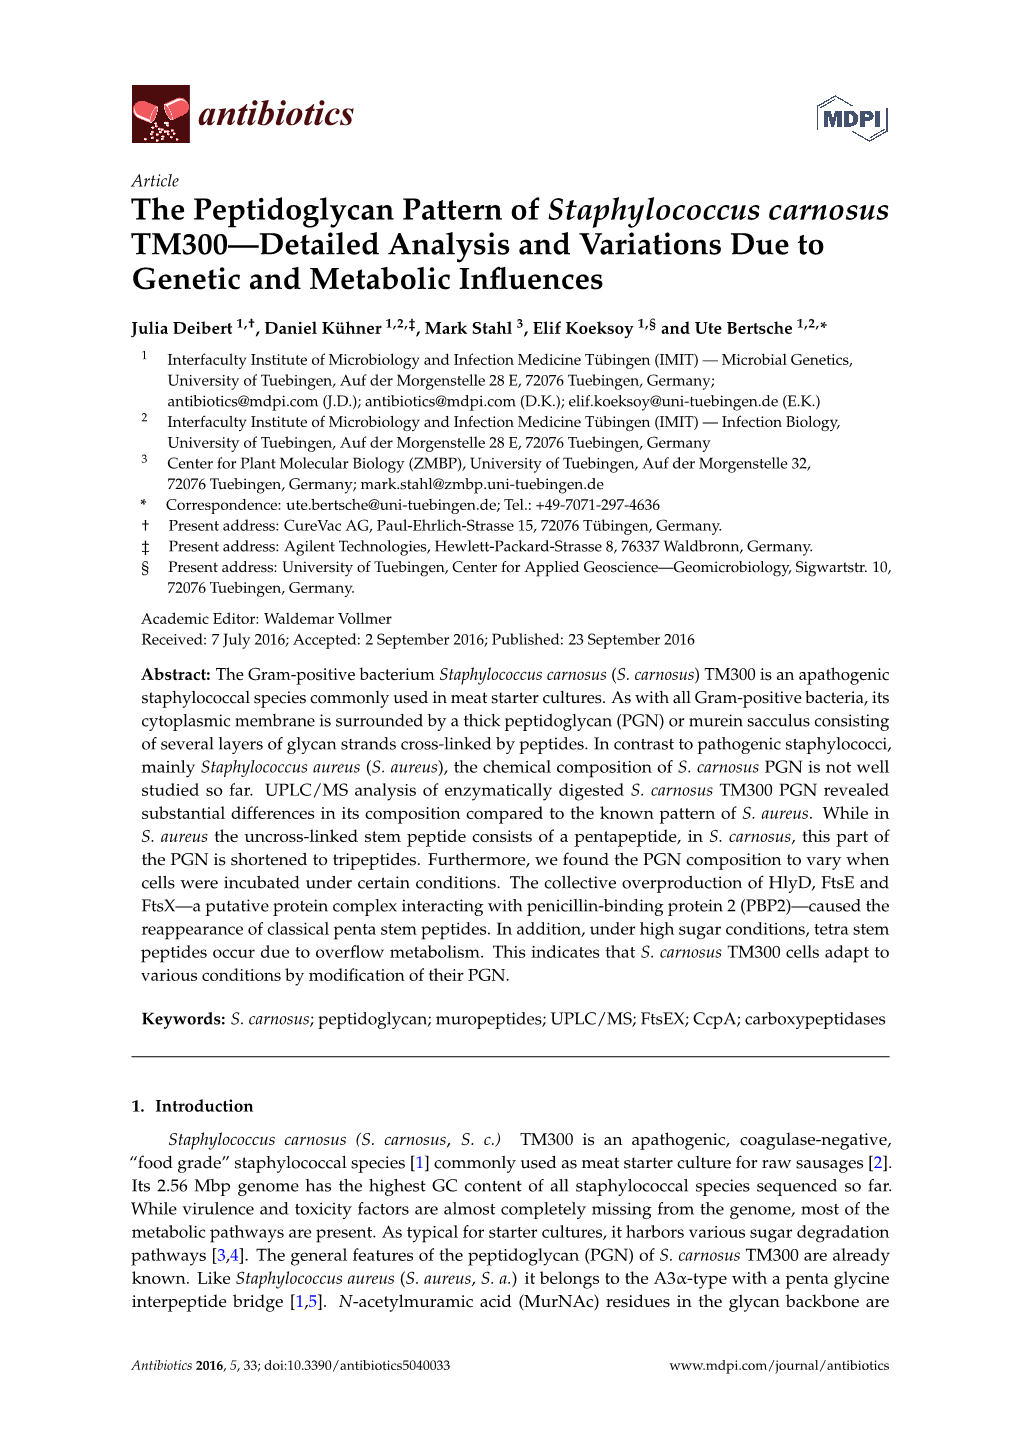 The Peptidoglycan Pattern of Staphylococcus Carnosus TM300—Detailed Analysis and Variations Due to Genetic and Metabolic Inﬂuences